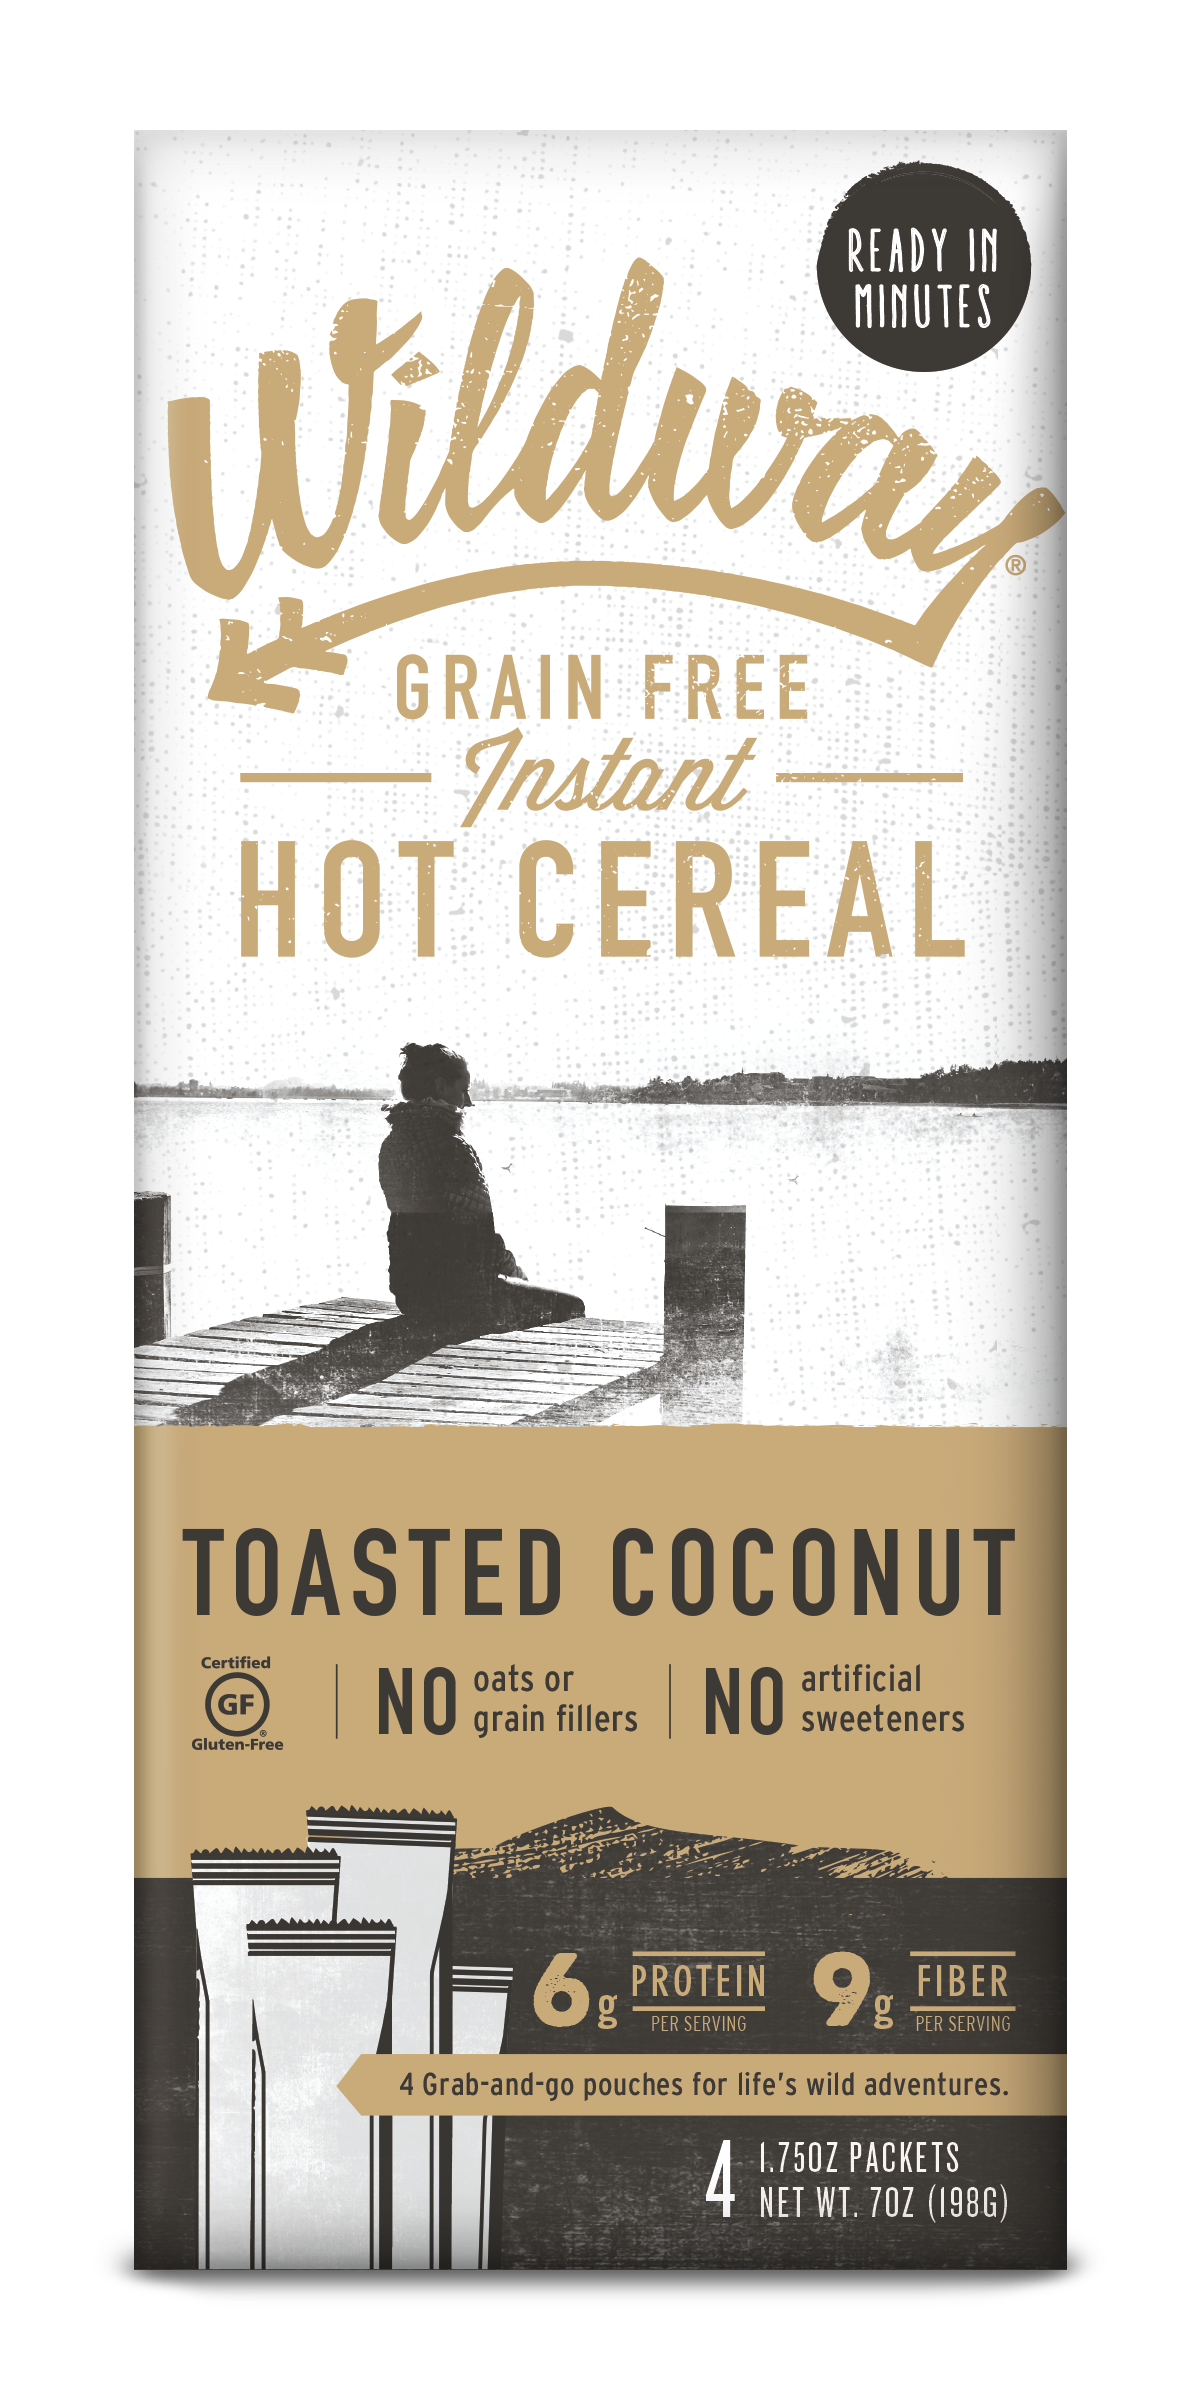 Grain-free Instant Keto Hot Cereal: Toasted Coconut, 7oz